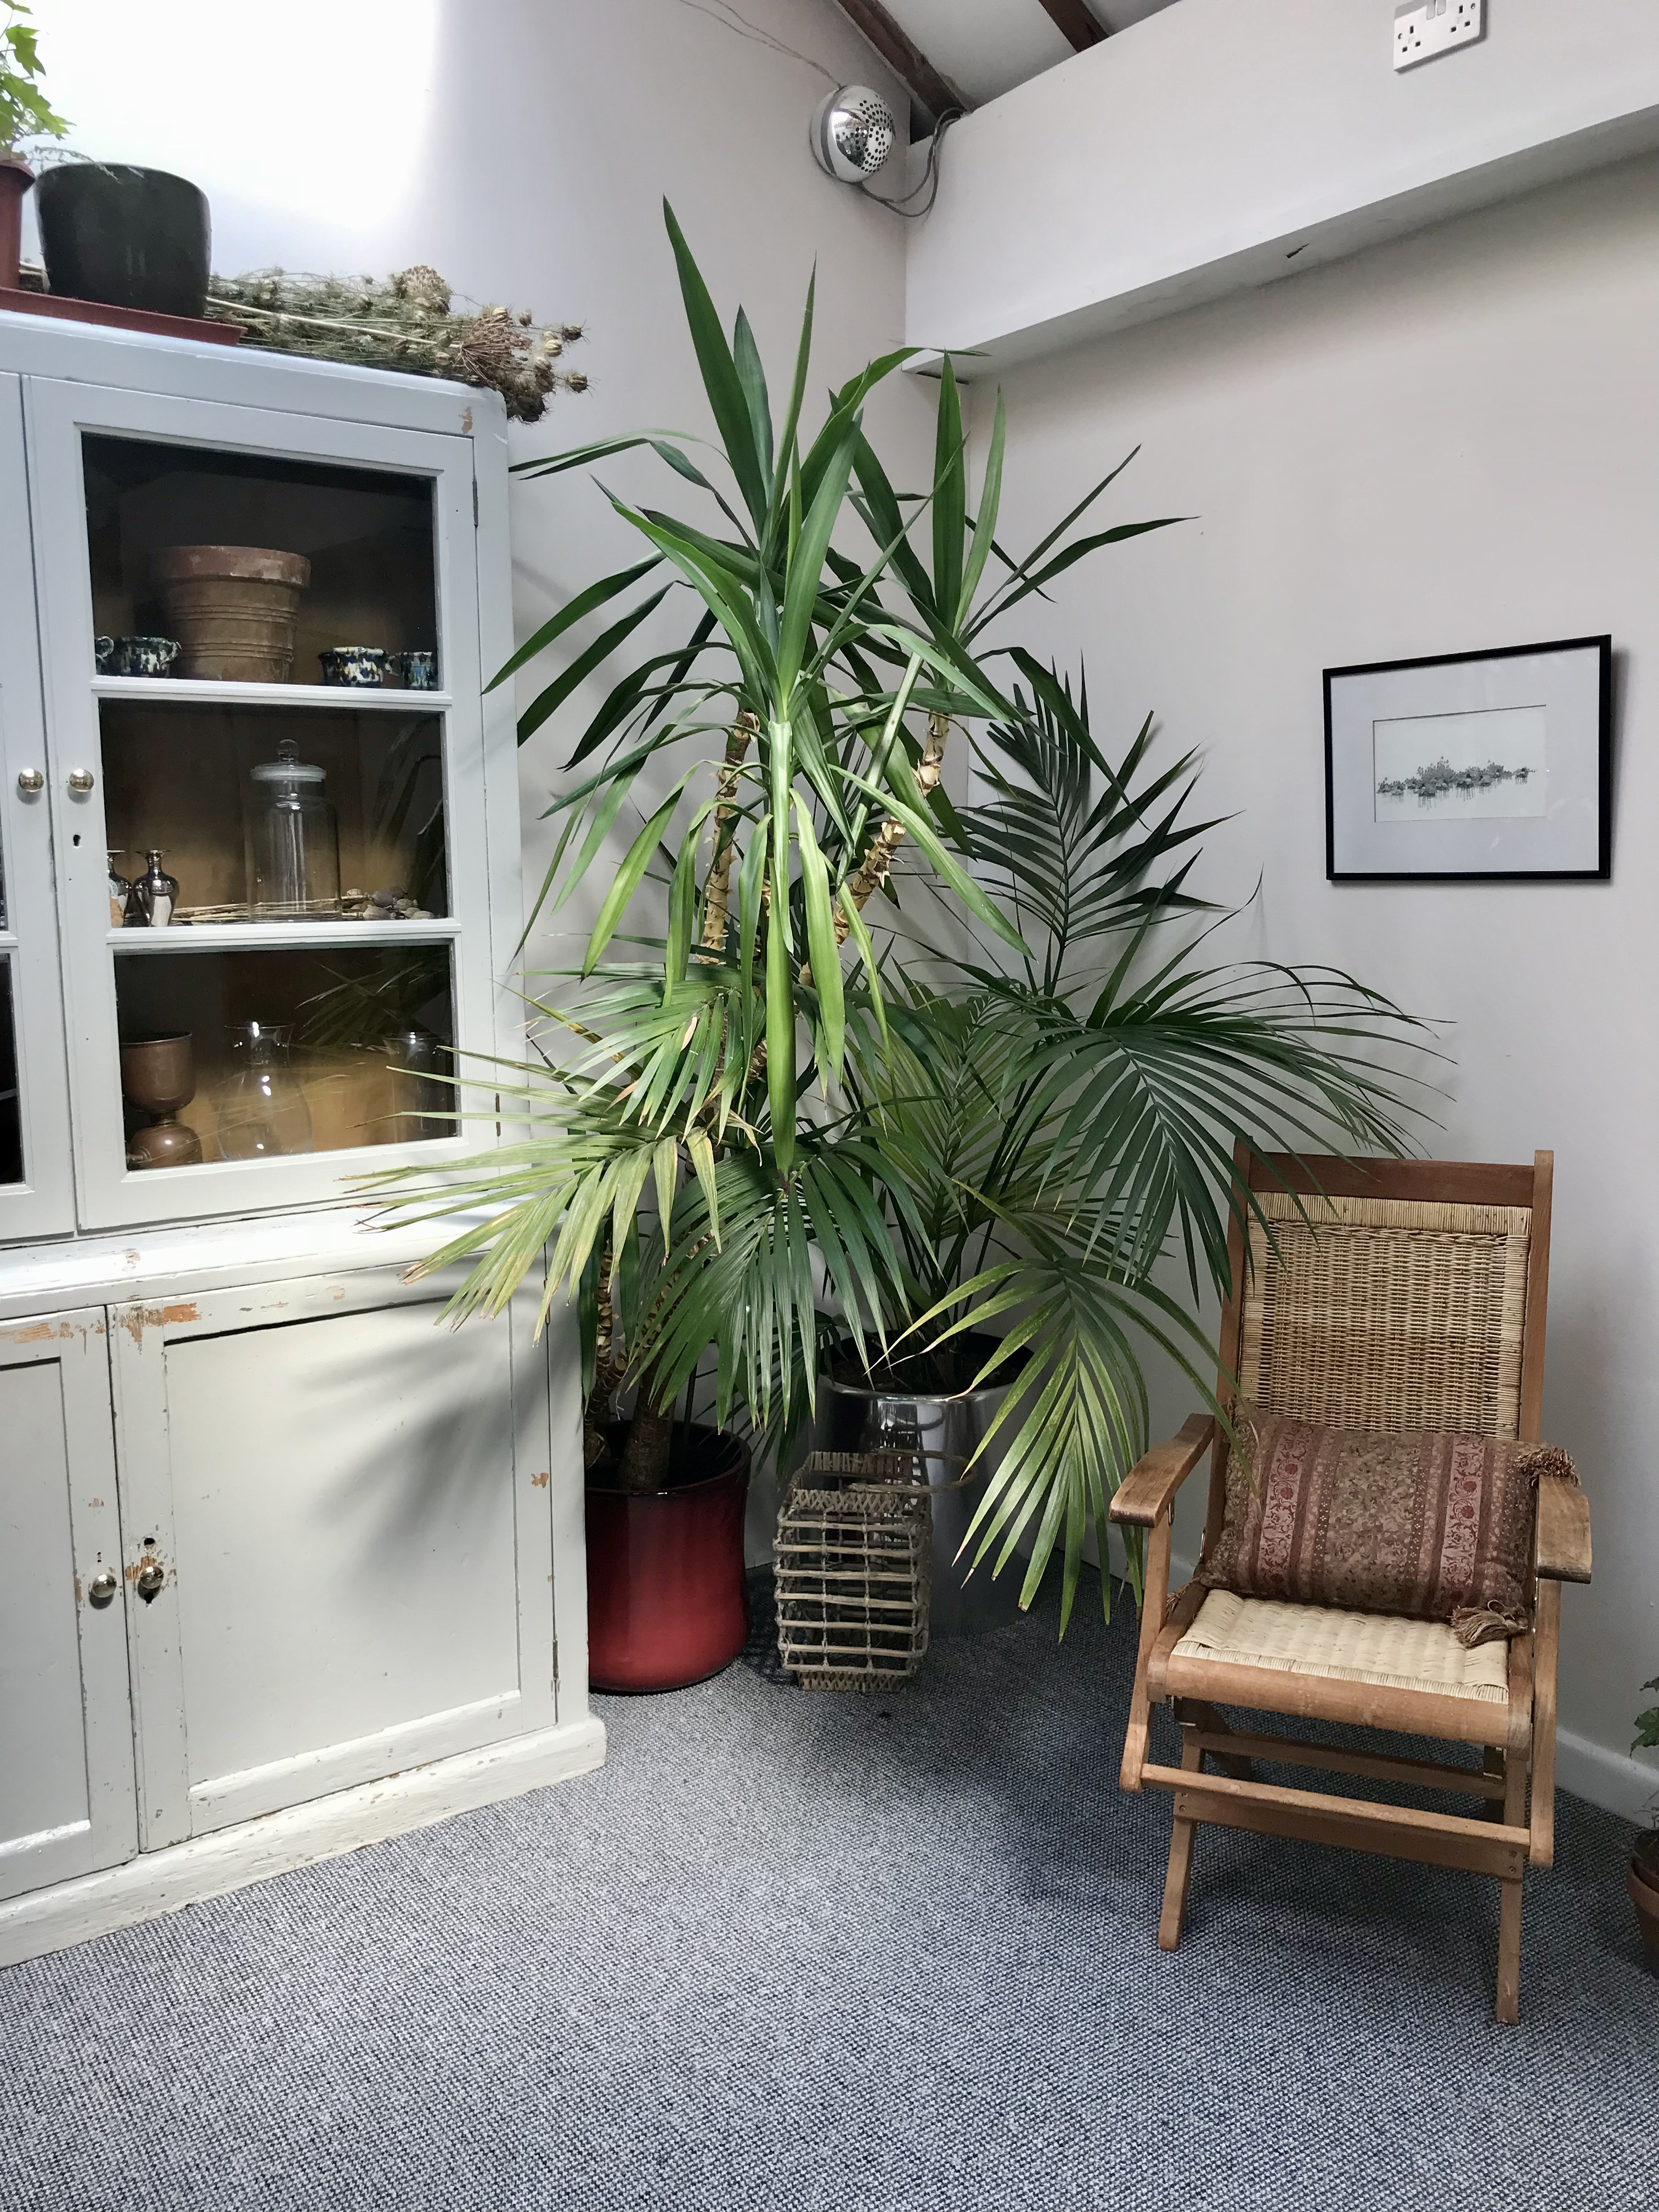 Large plant, wooden chair and a large cupboard